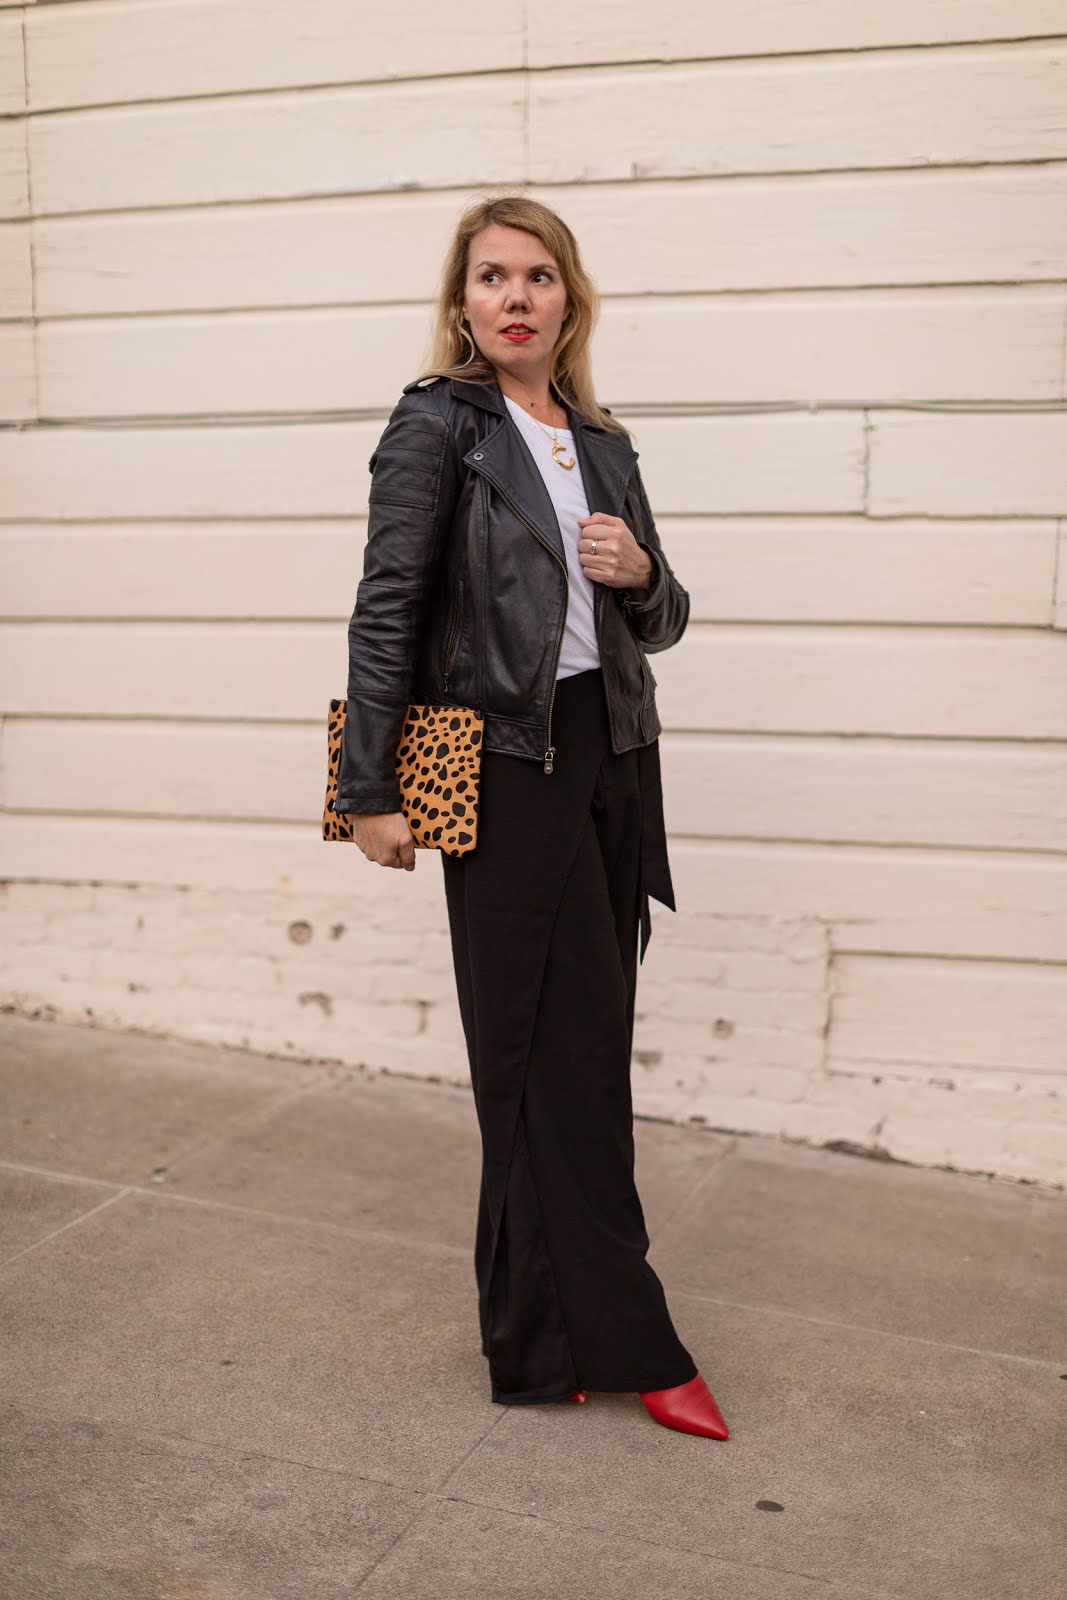 How to Style Wide Leg Pants + Two Outfits With Wide Leg Pants